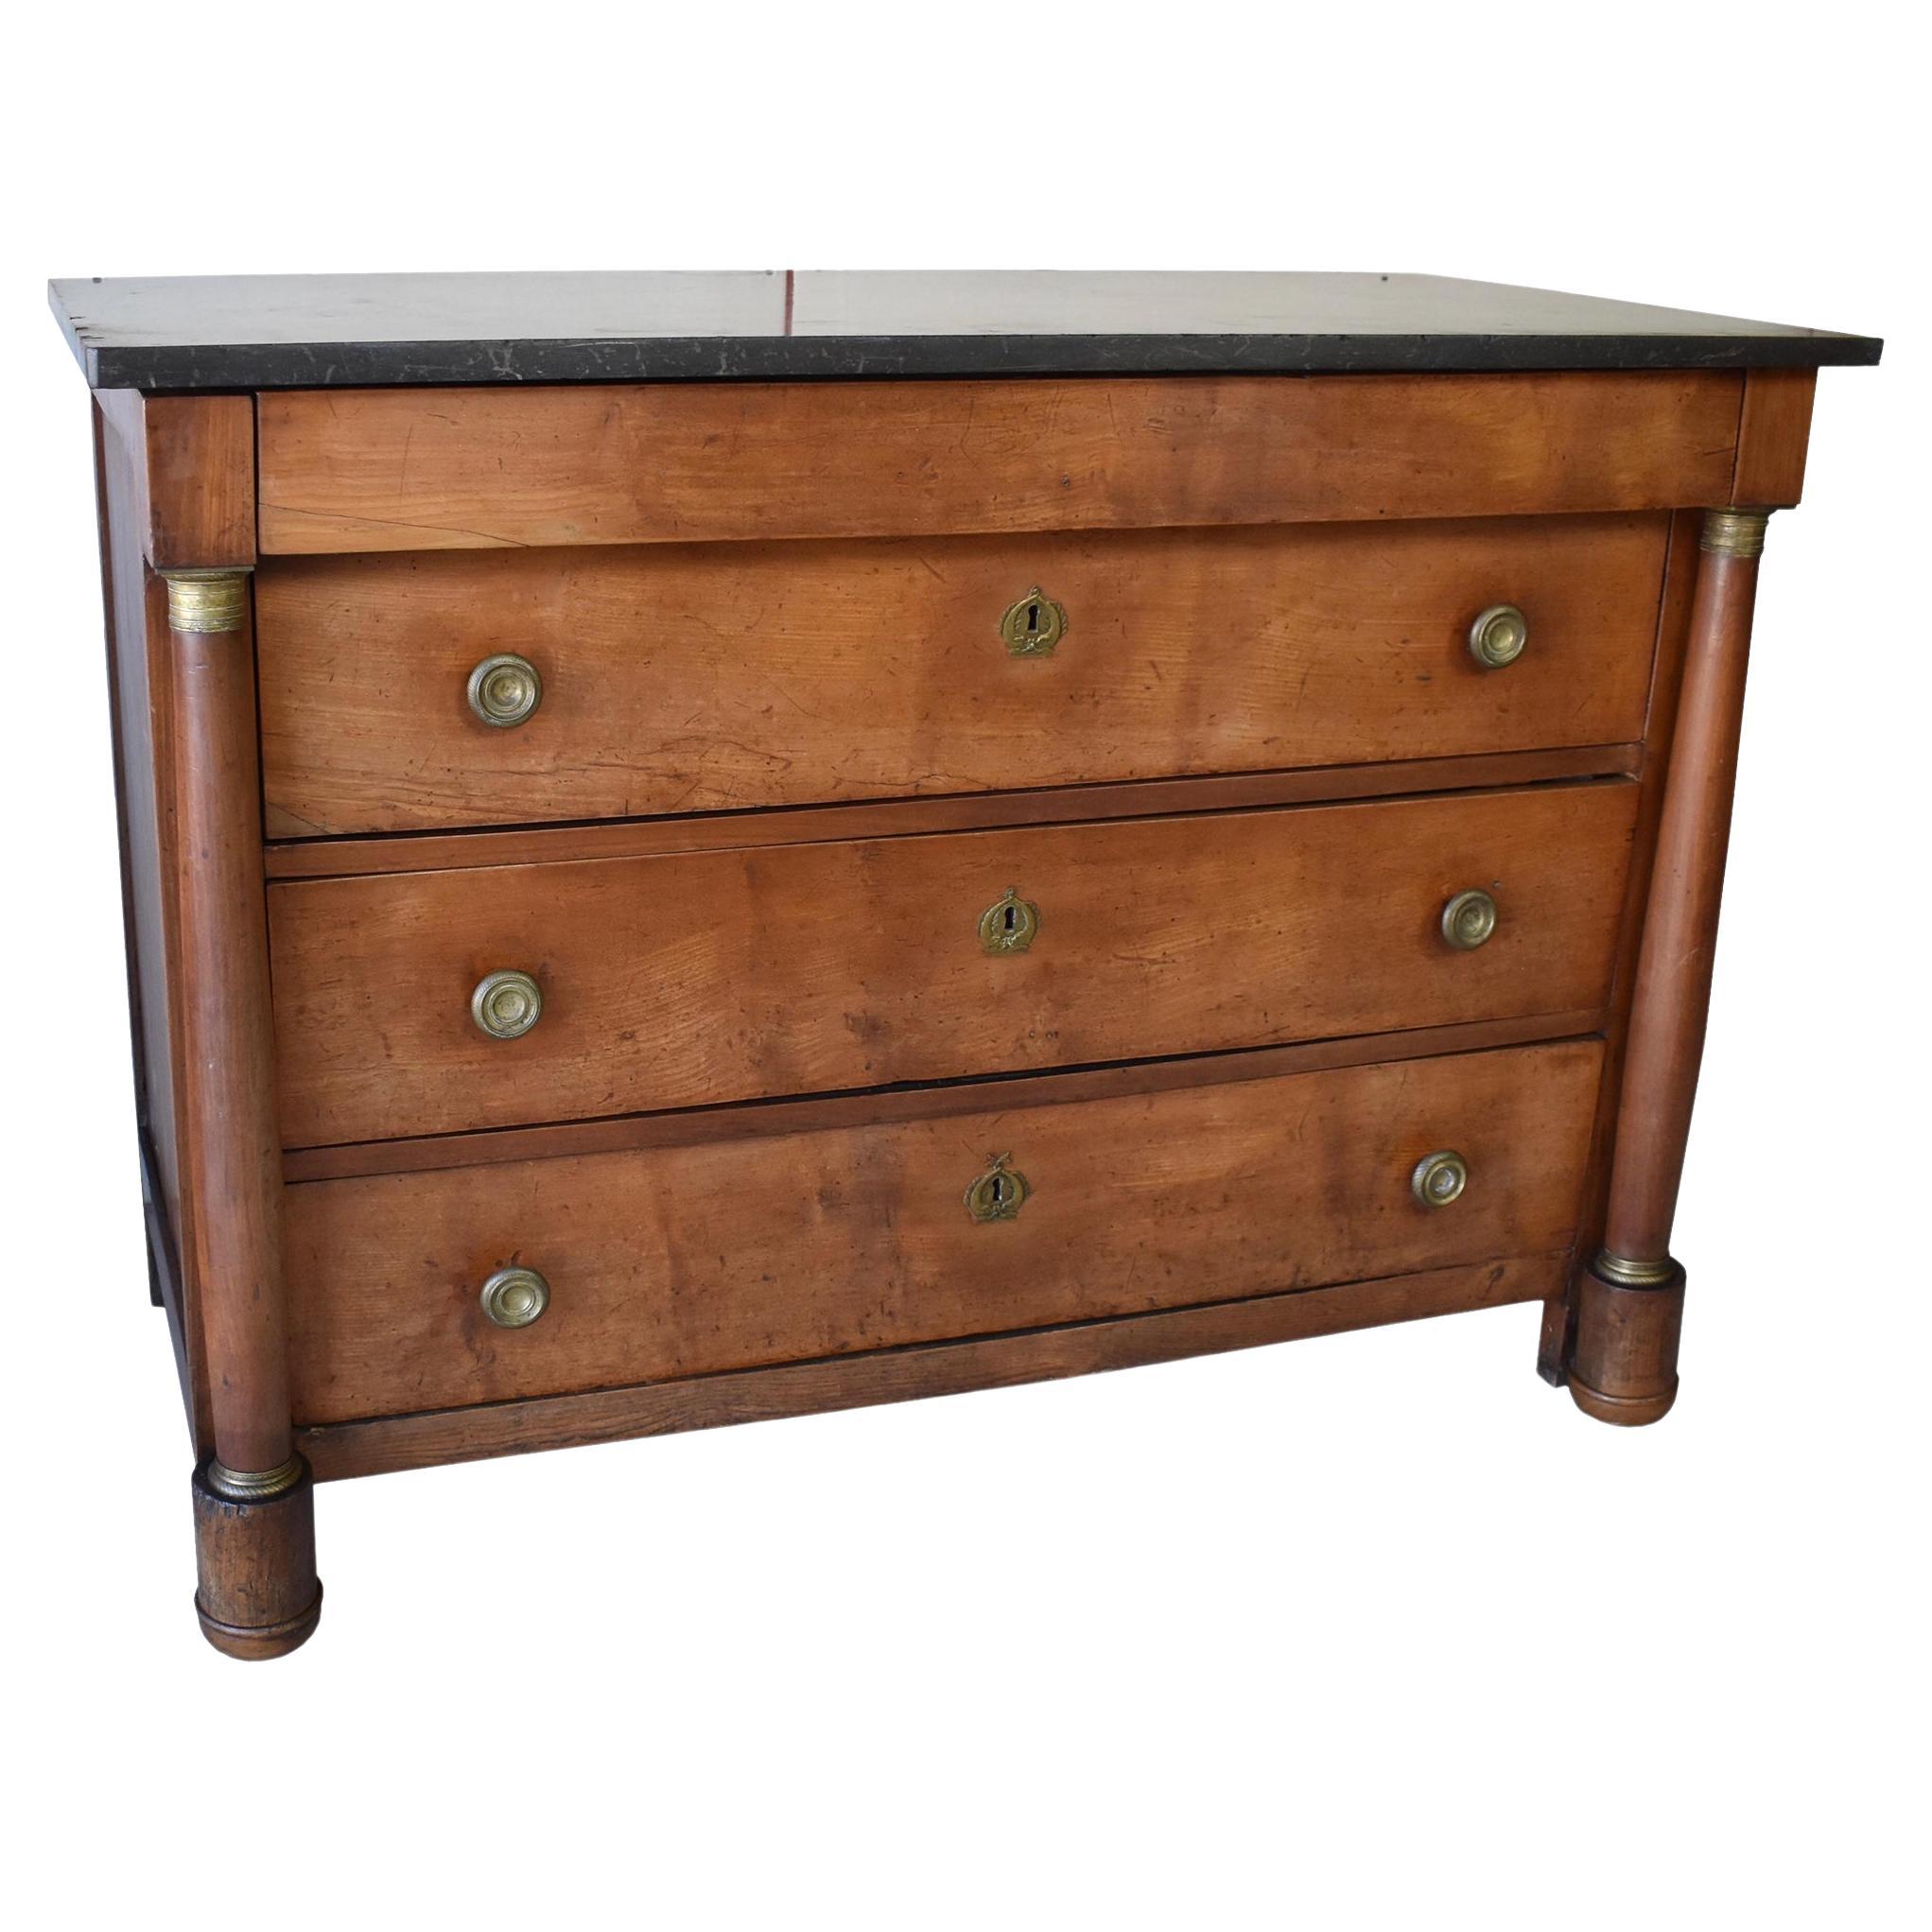 Late 18th Century French Empire Cherry Marble Top Commode